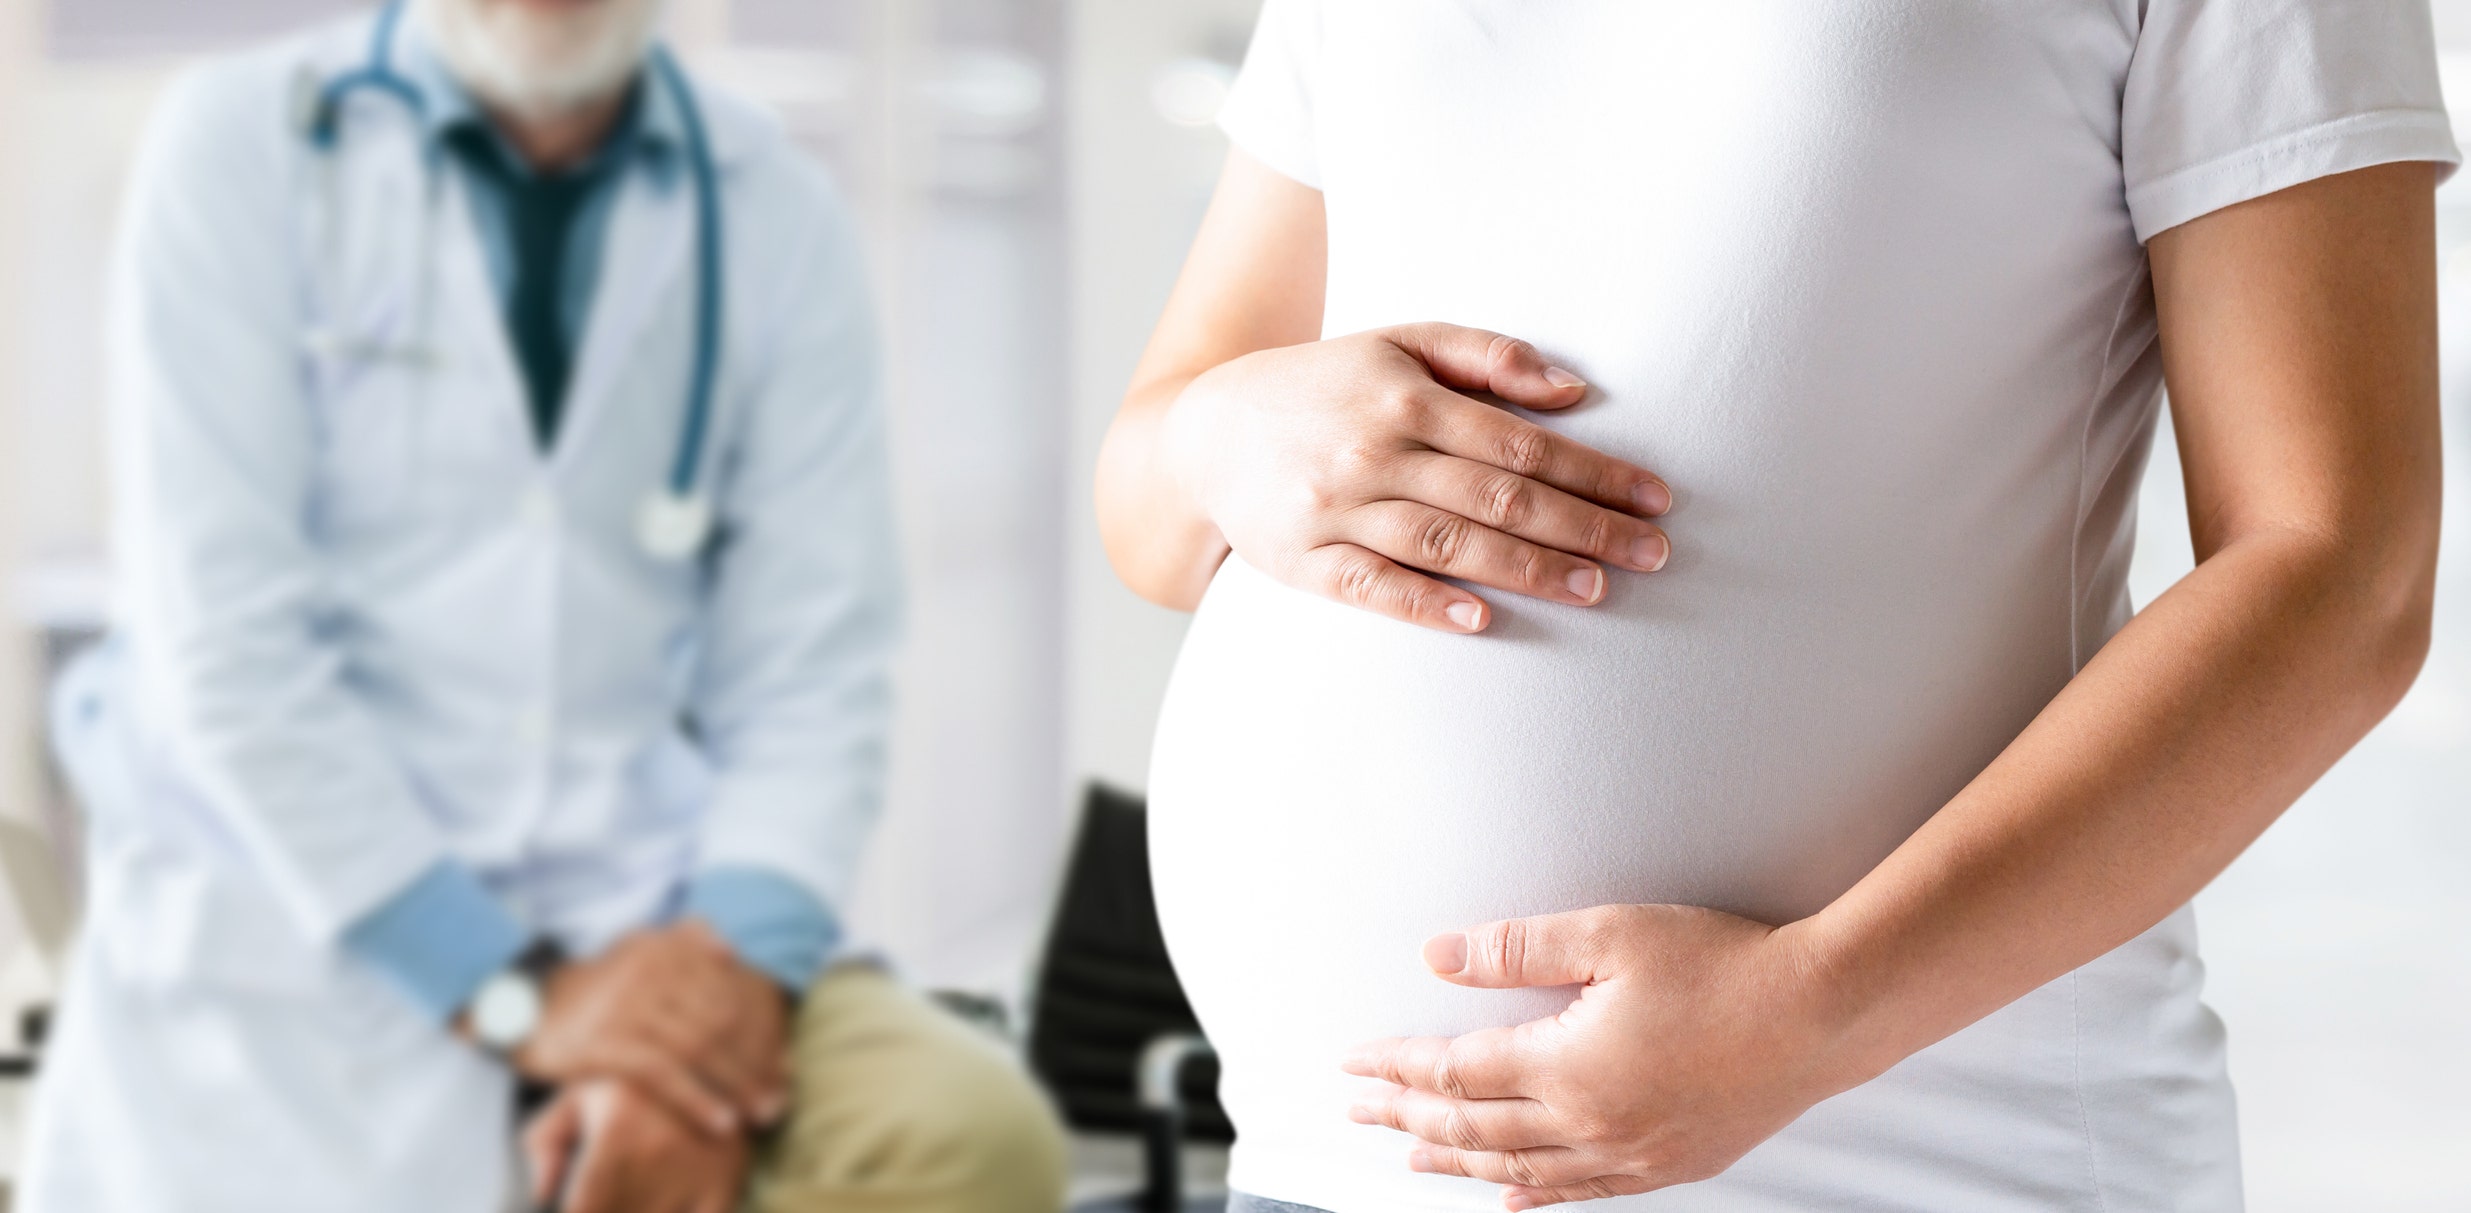 Moderna’s COVID-19 vaccine is now recommended for pregnant women